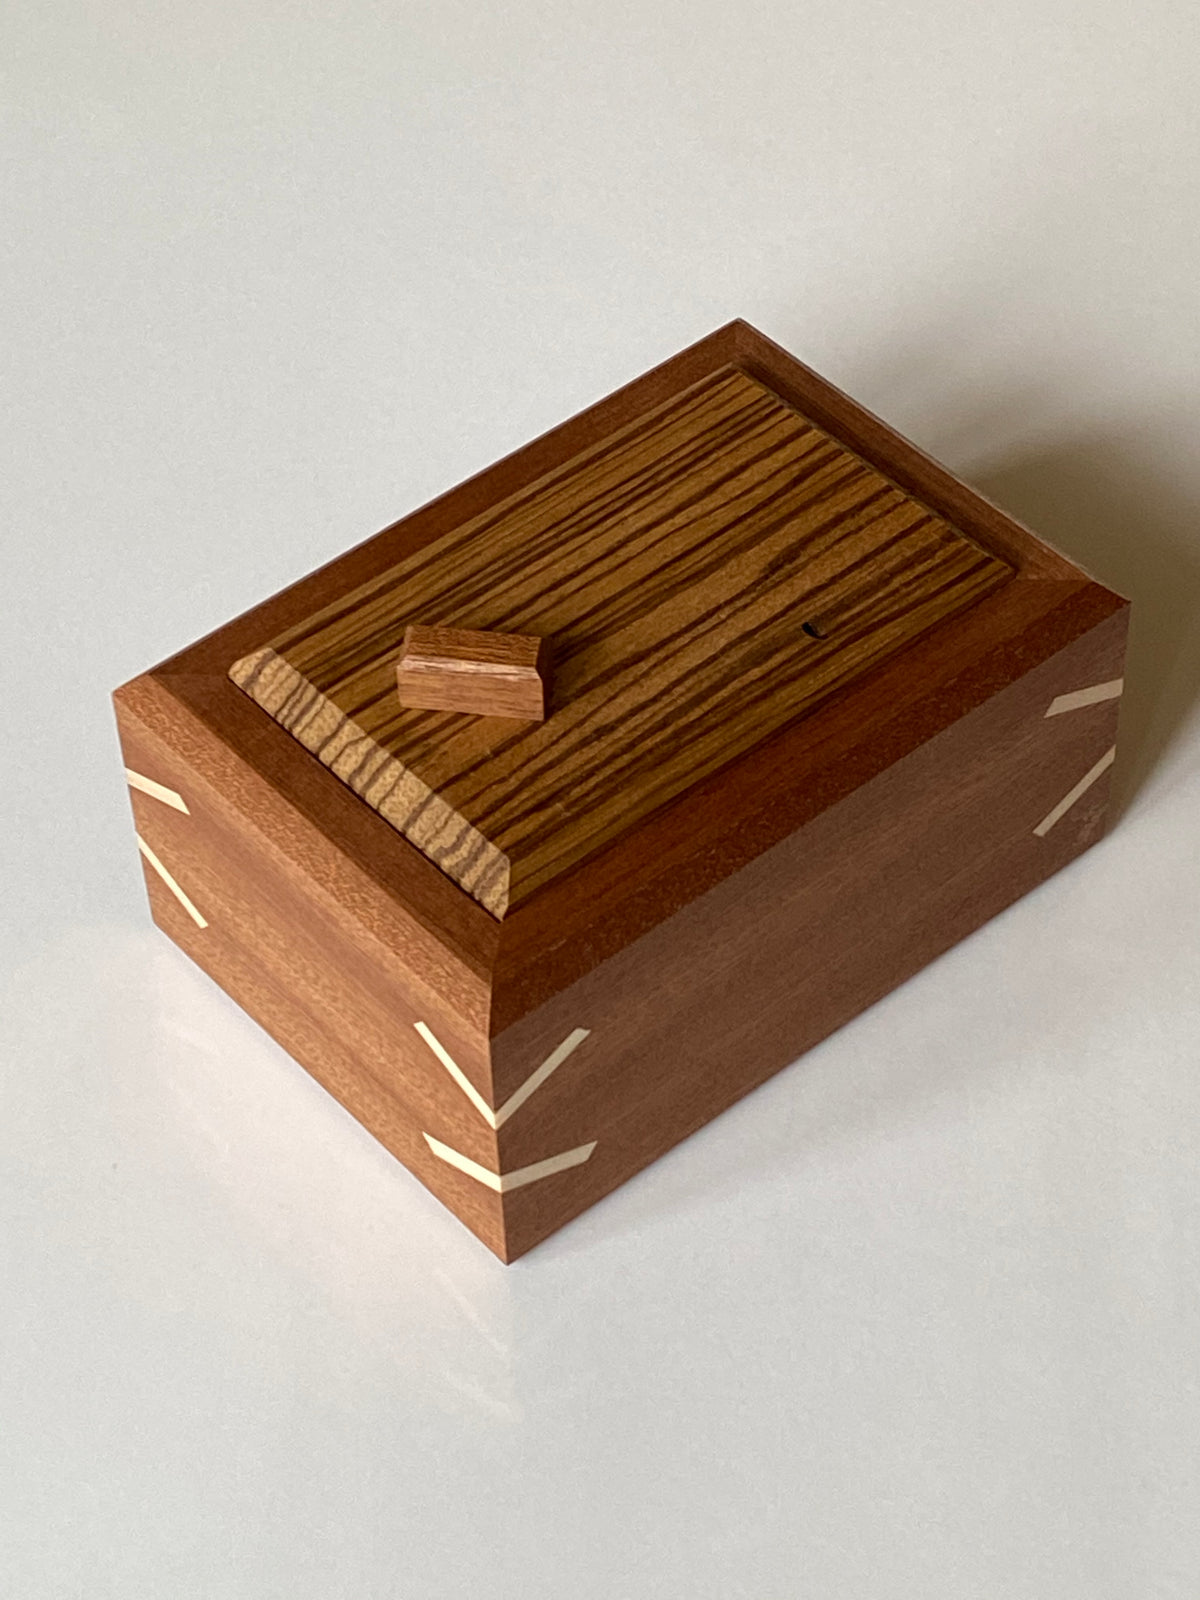 The Blinded II Puzzle Box by Dee Dixon